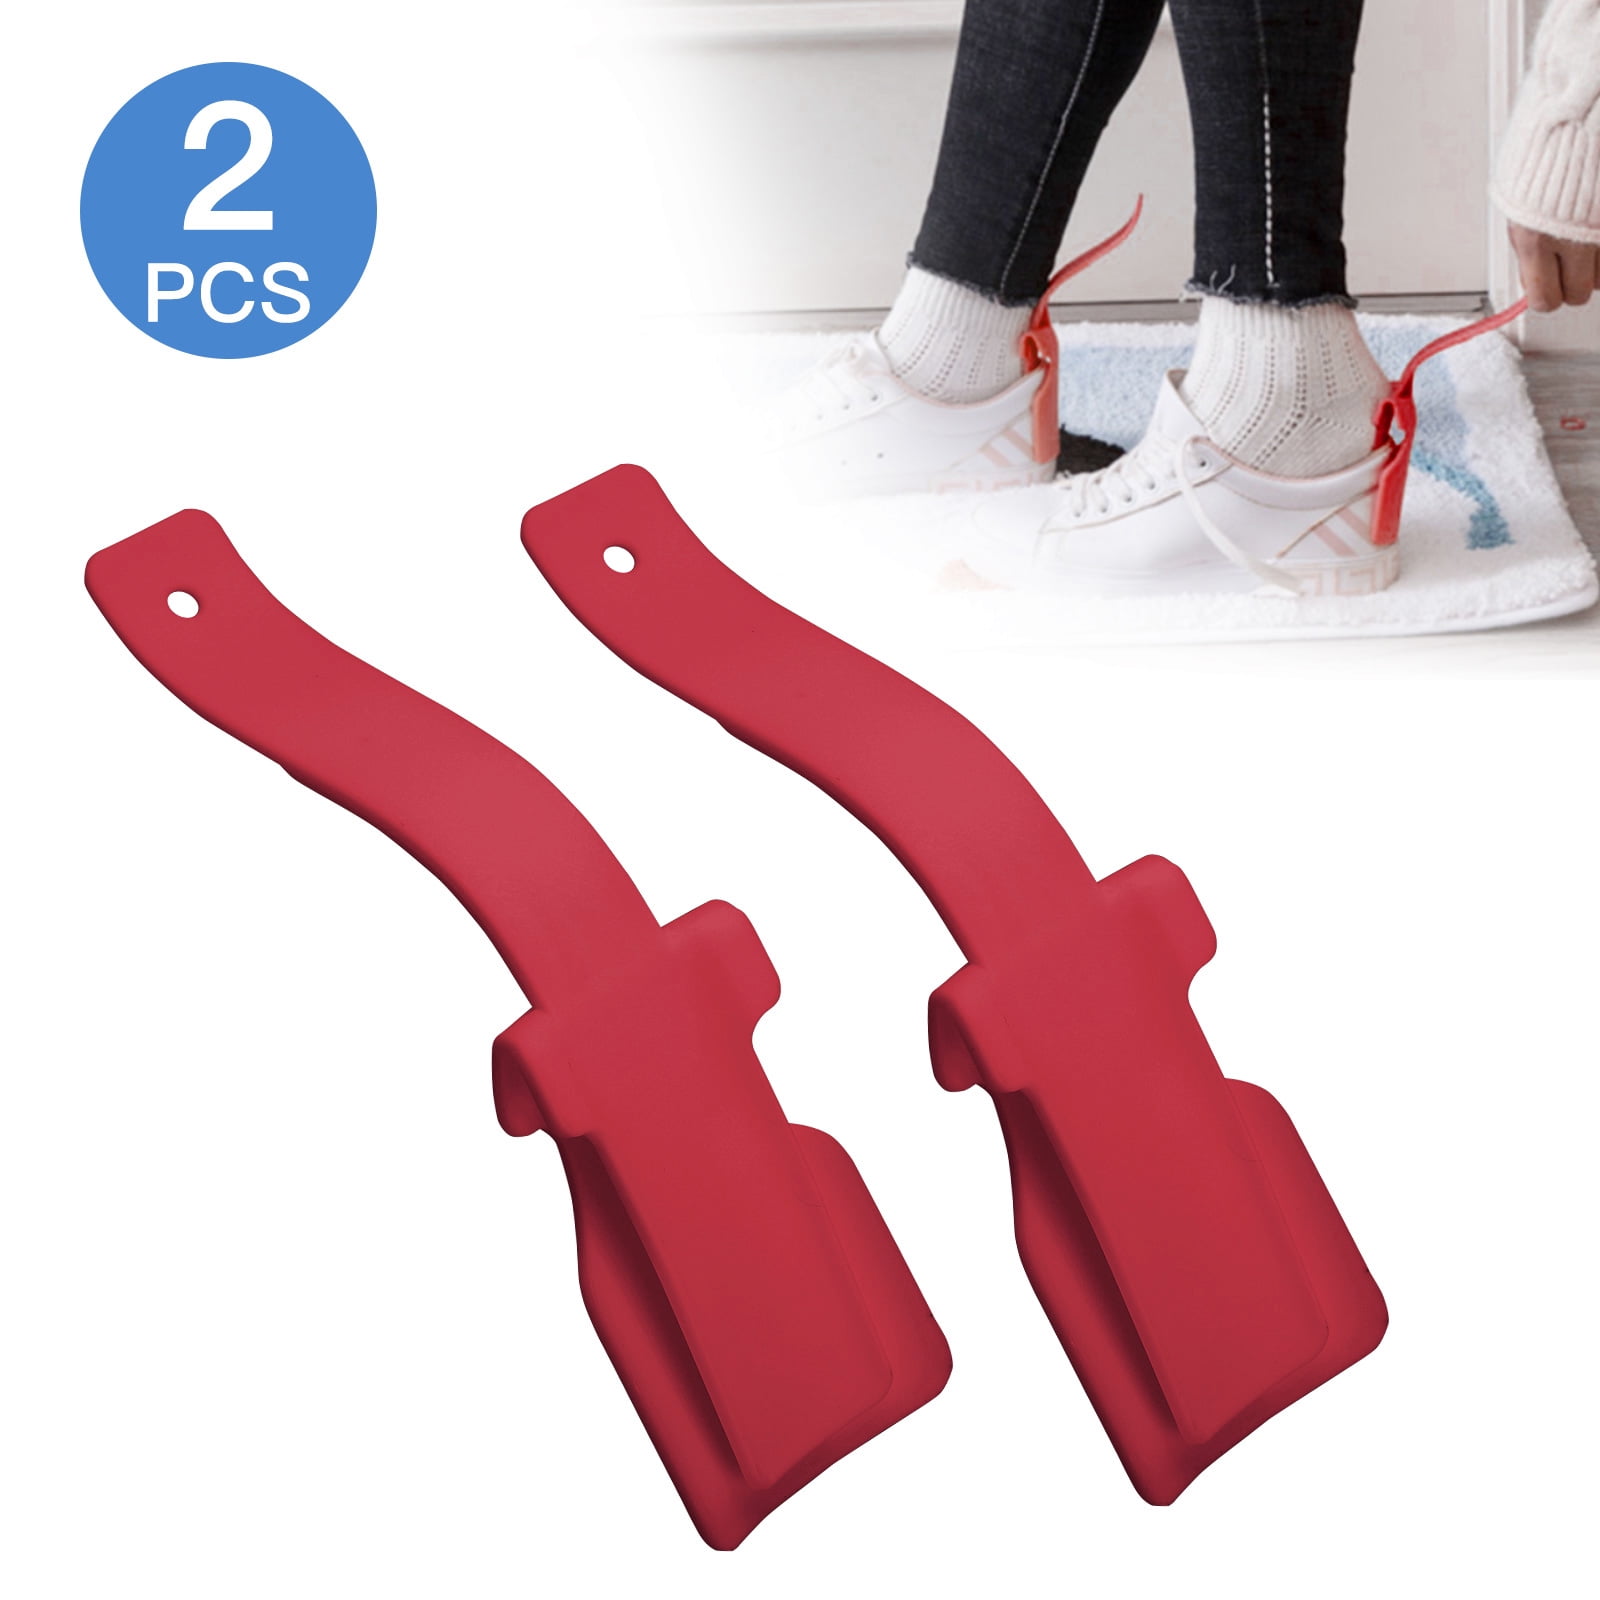 Women Handled Plastic Shoehorn Sock Slider for Men Senior and Kids One Size Fits for All Shoes Easy on Easy Off Blue, 1 pc Newest Lazy Shoe Helper Portable Shoes Lifting Helper 